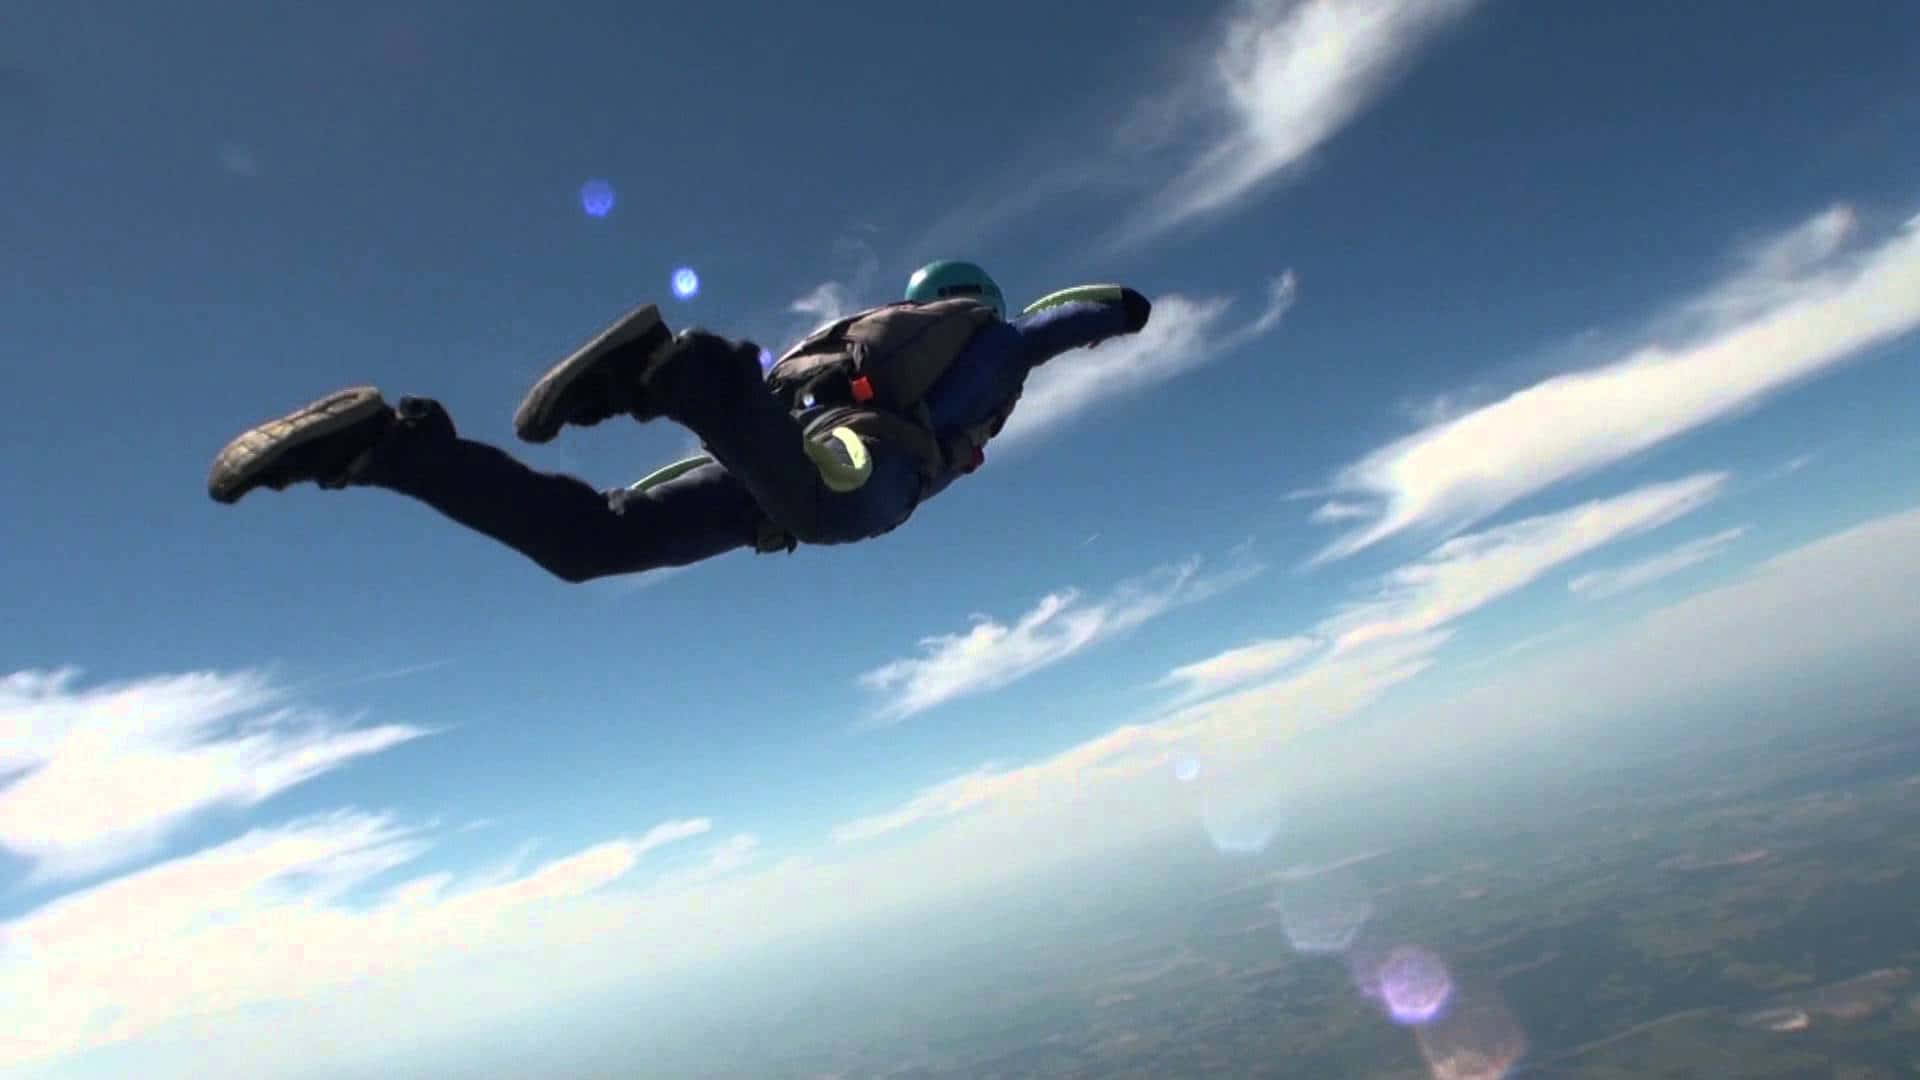 Experience the adrenaline rush of skydiving!